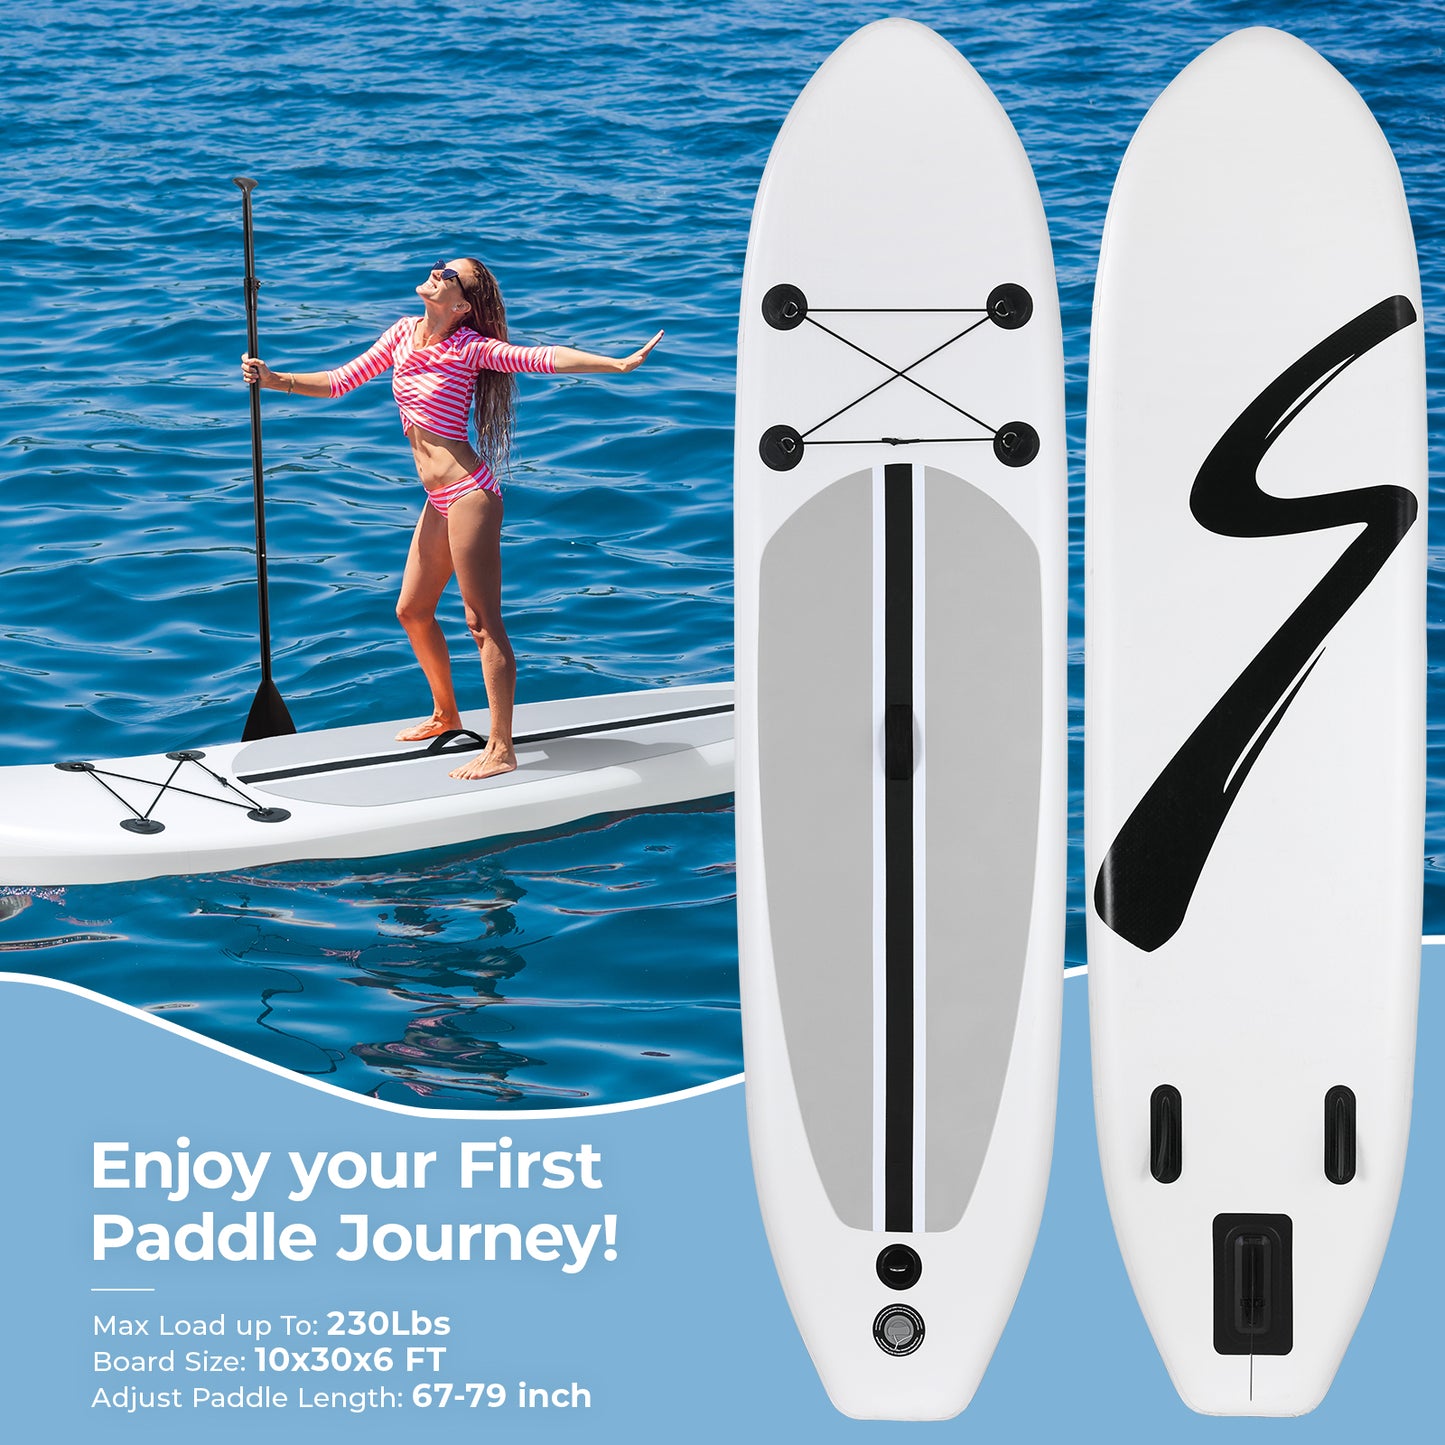 Arlopu 10FT Inflatable Stand Up Paddle Board, 3 Fins Paddleboard with Full SUP Accessories